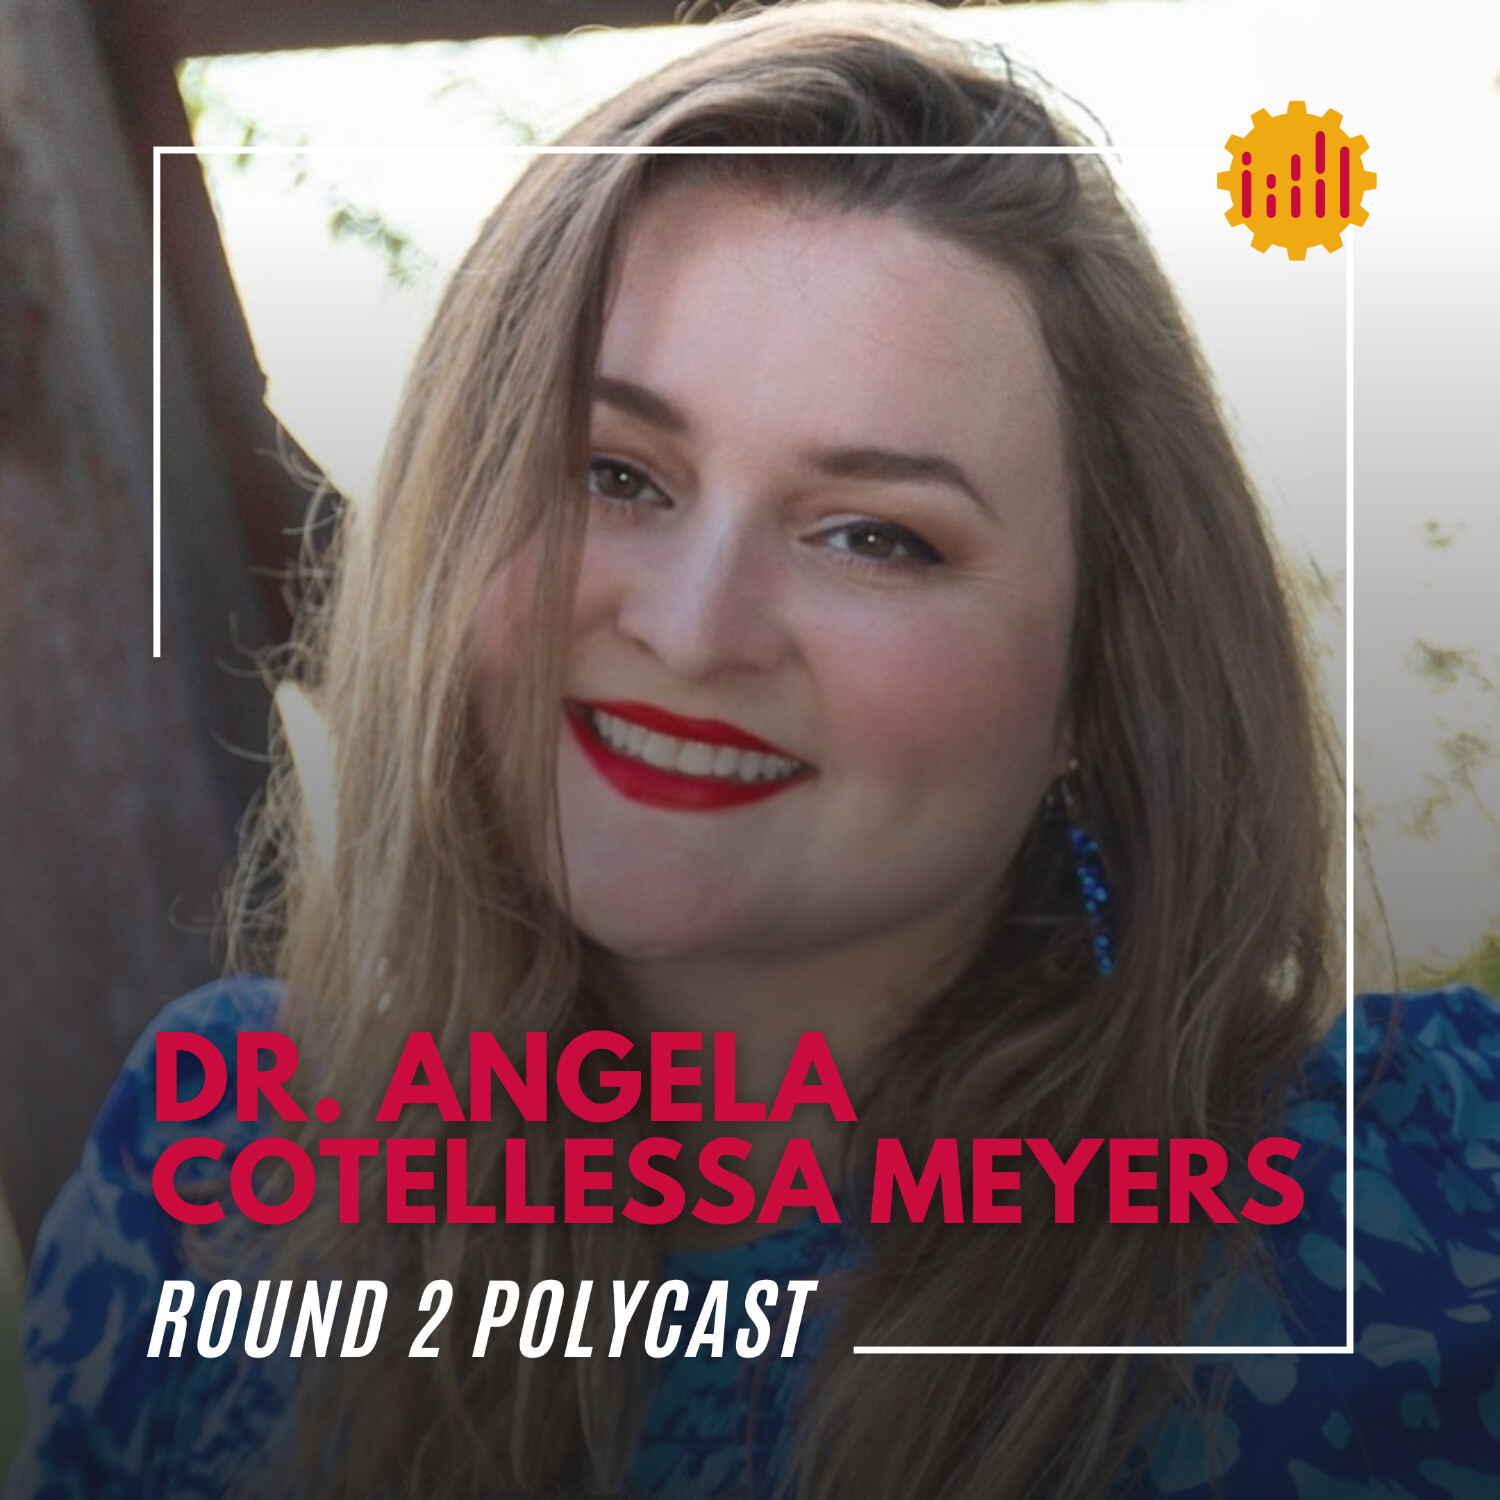 Embracing Polymathy: Dr. Angela Cotellessa's Vision for Lifelong Learning and Global Innovation